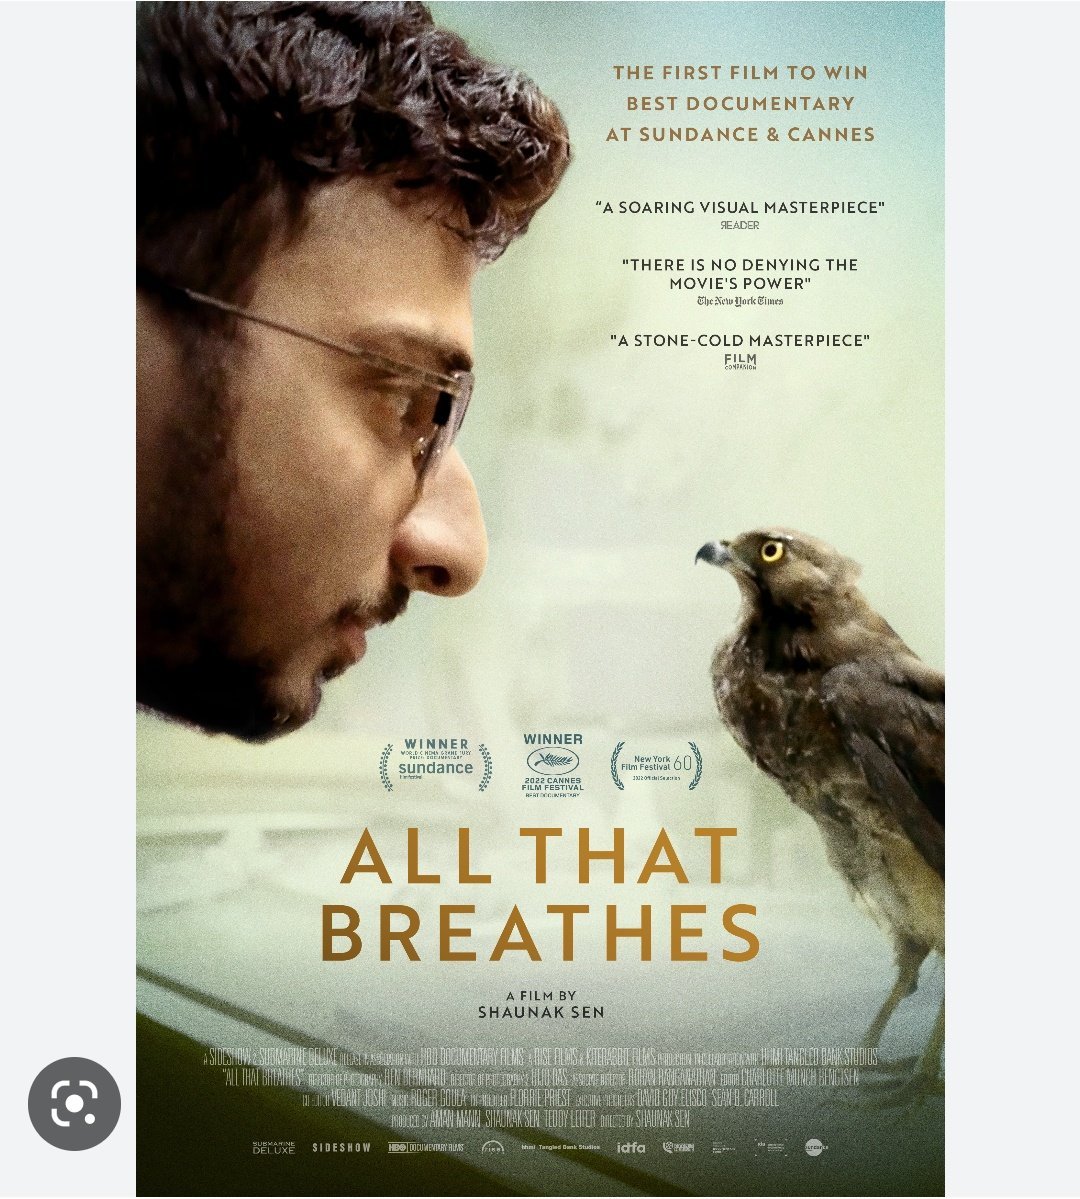 I loved All That Breathes. A stunning and poignant look at friendship, the environment, and humankind’s place in it. A beautiful slow burn of a film. If you’re an Oscar voter this deserves a look! Highly recommend.